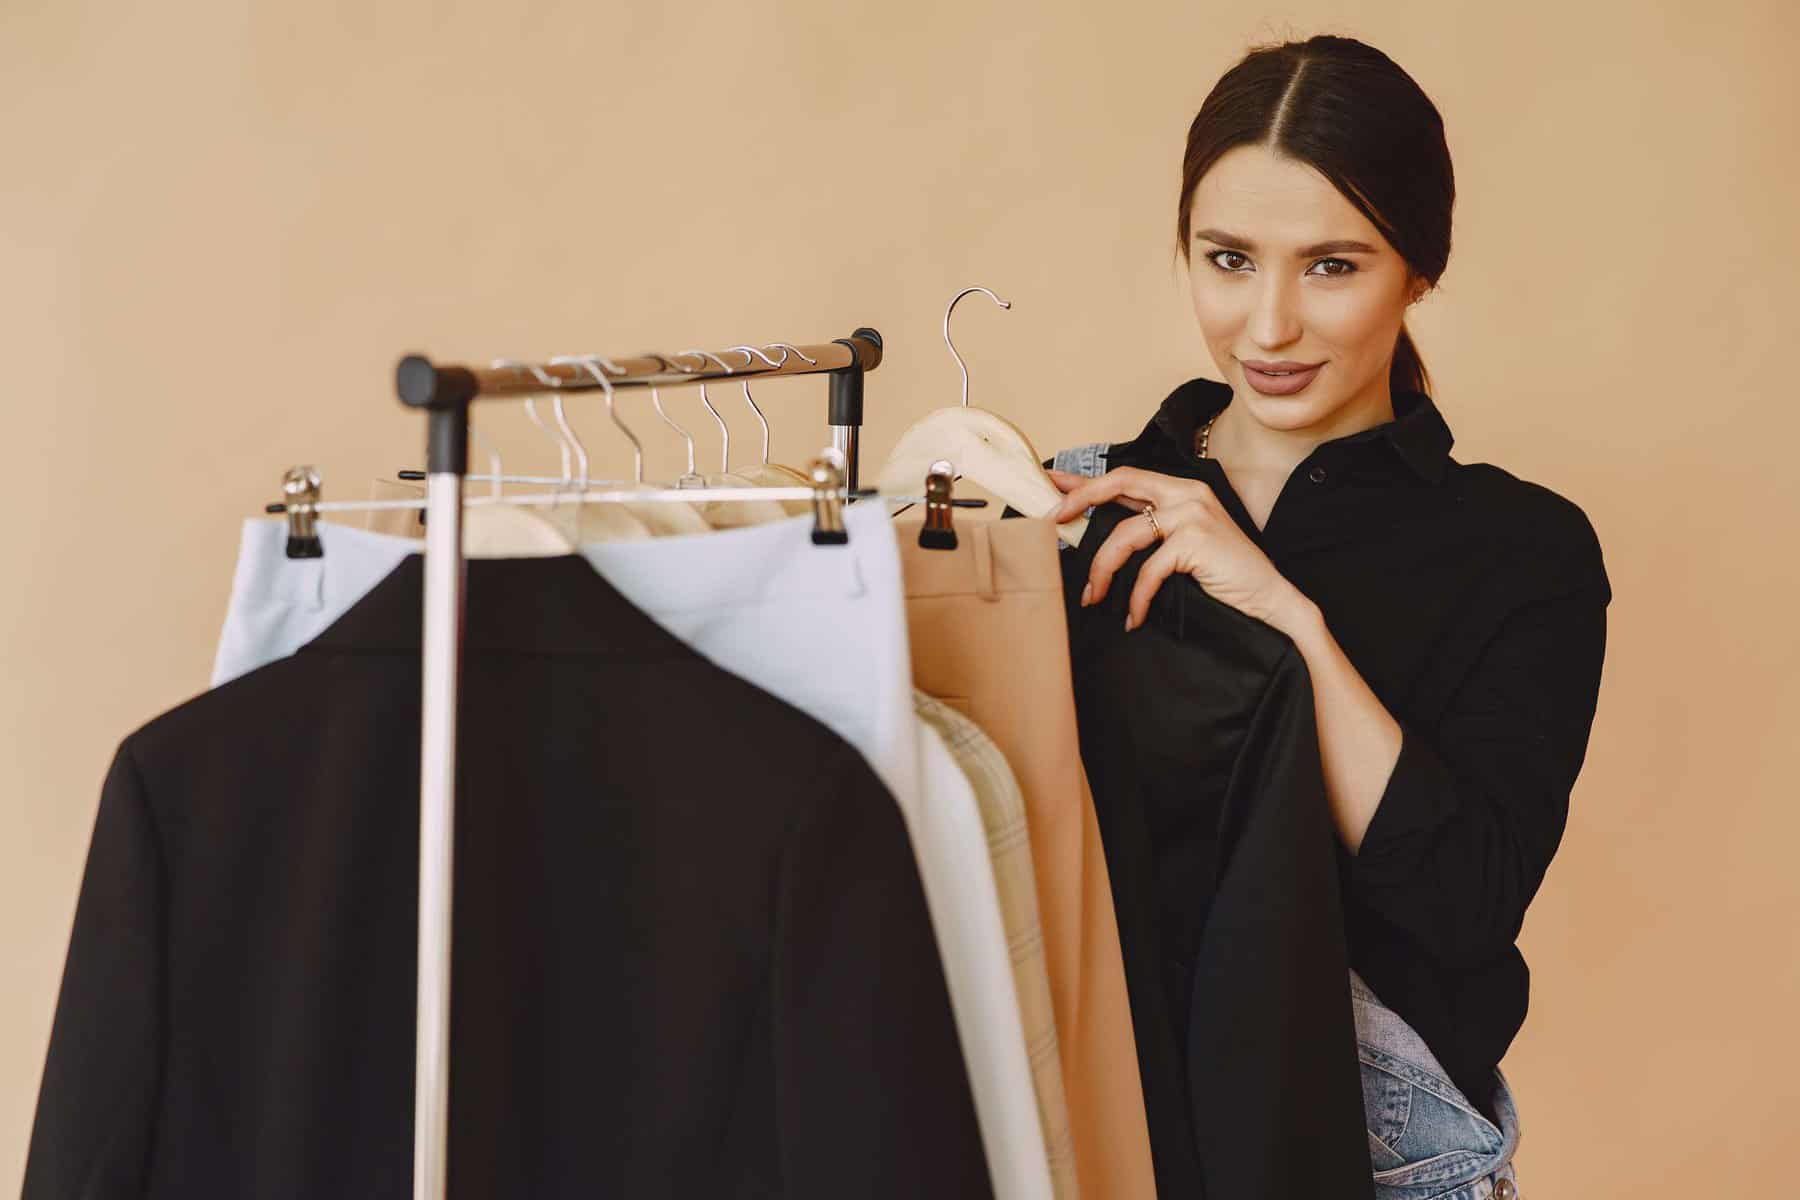 Shades of Black Every Polish Woman Should Know When Choosing Outfits ...